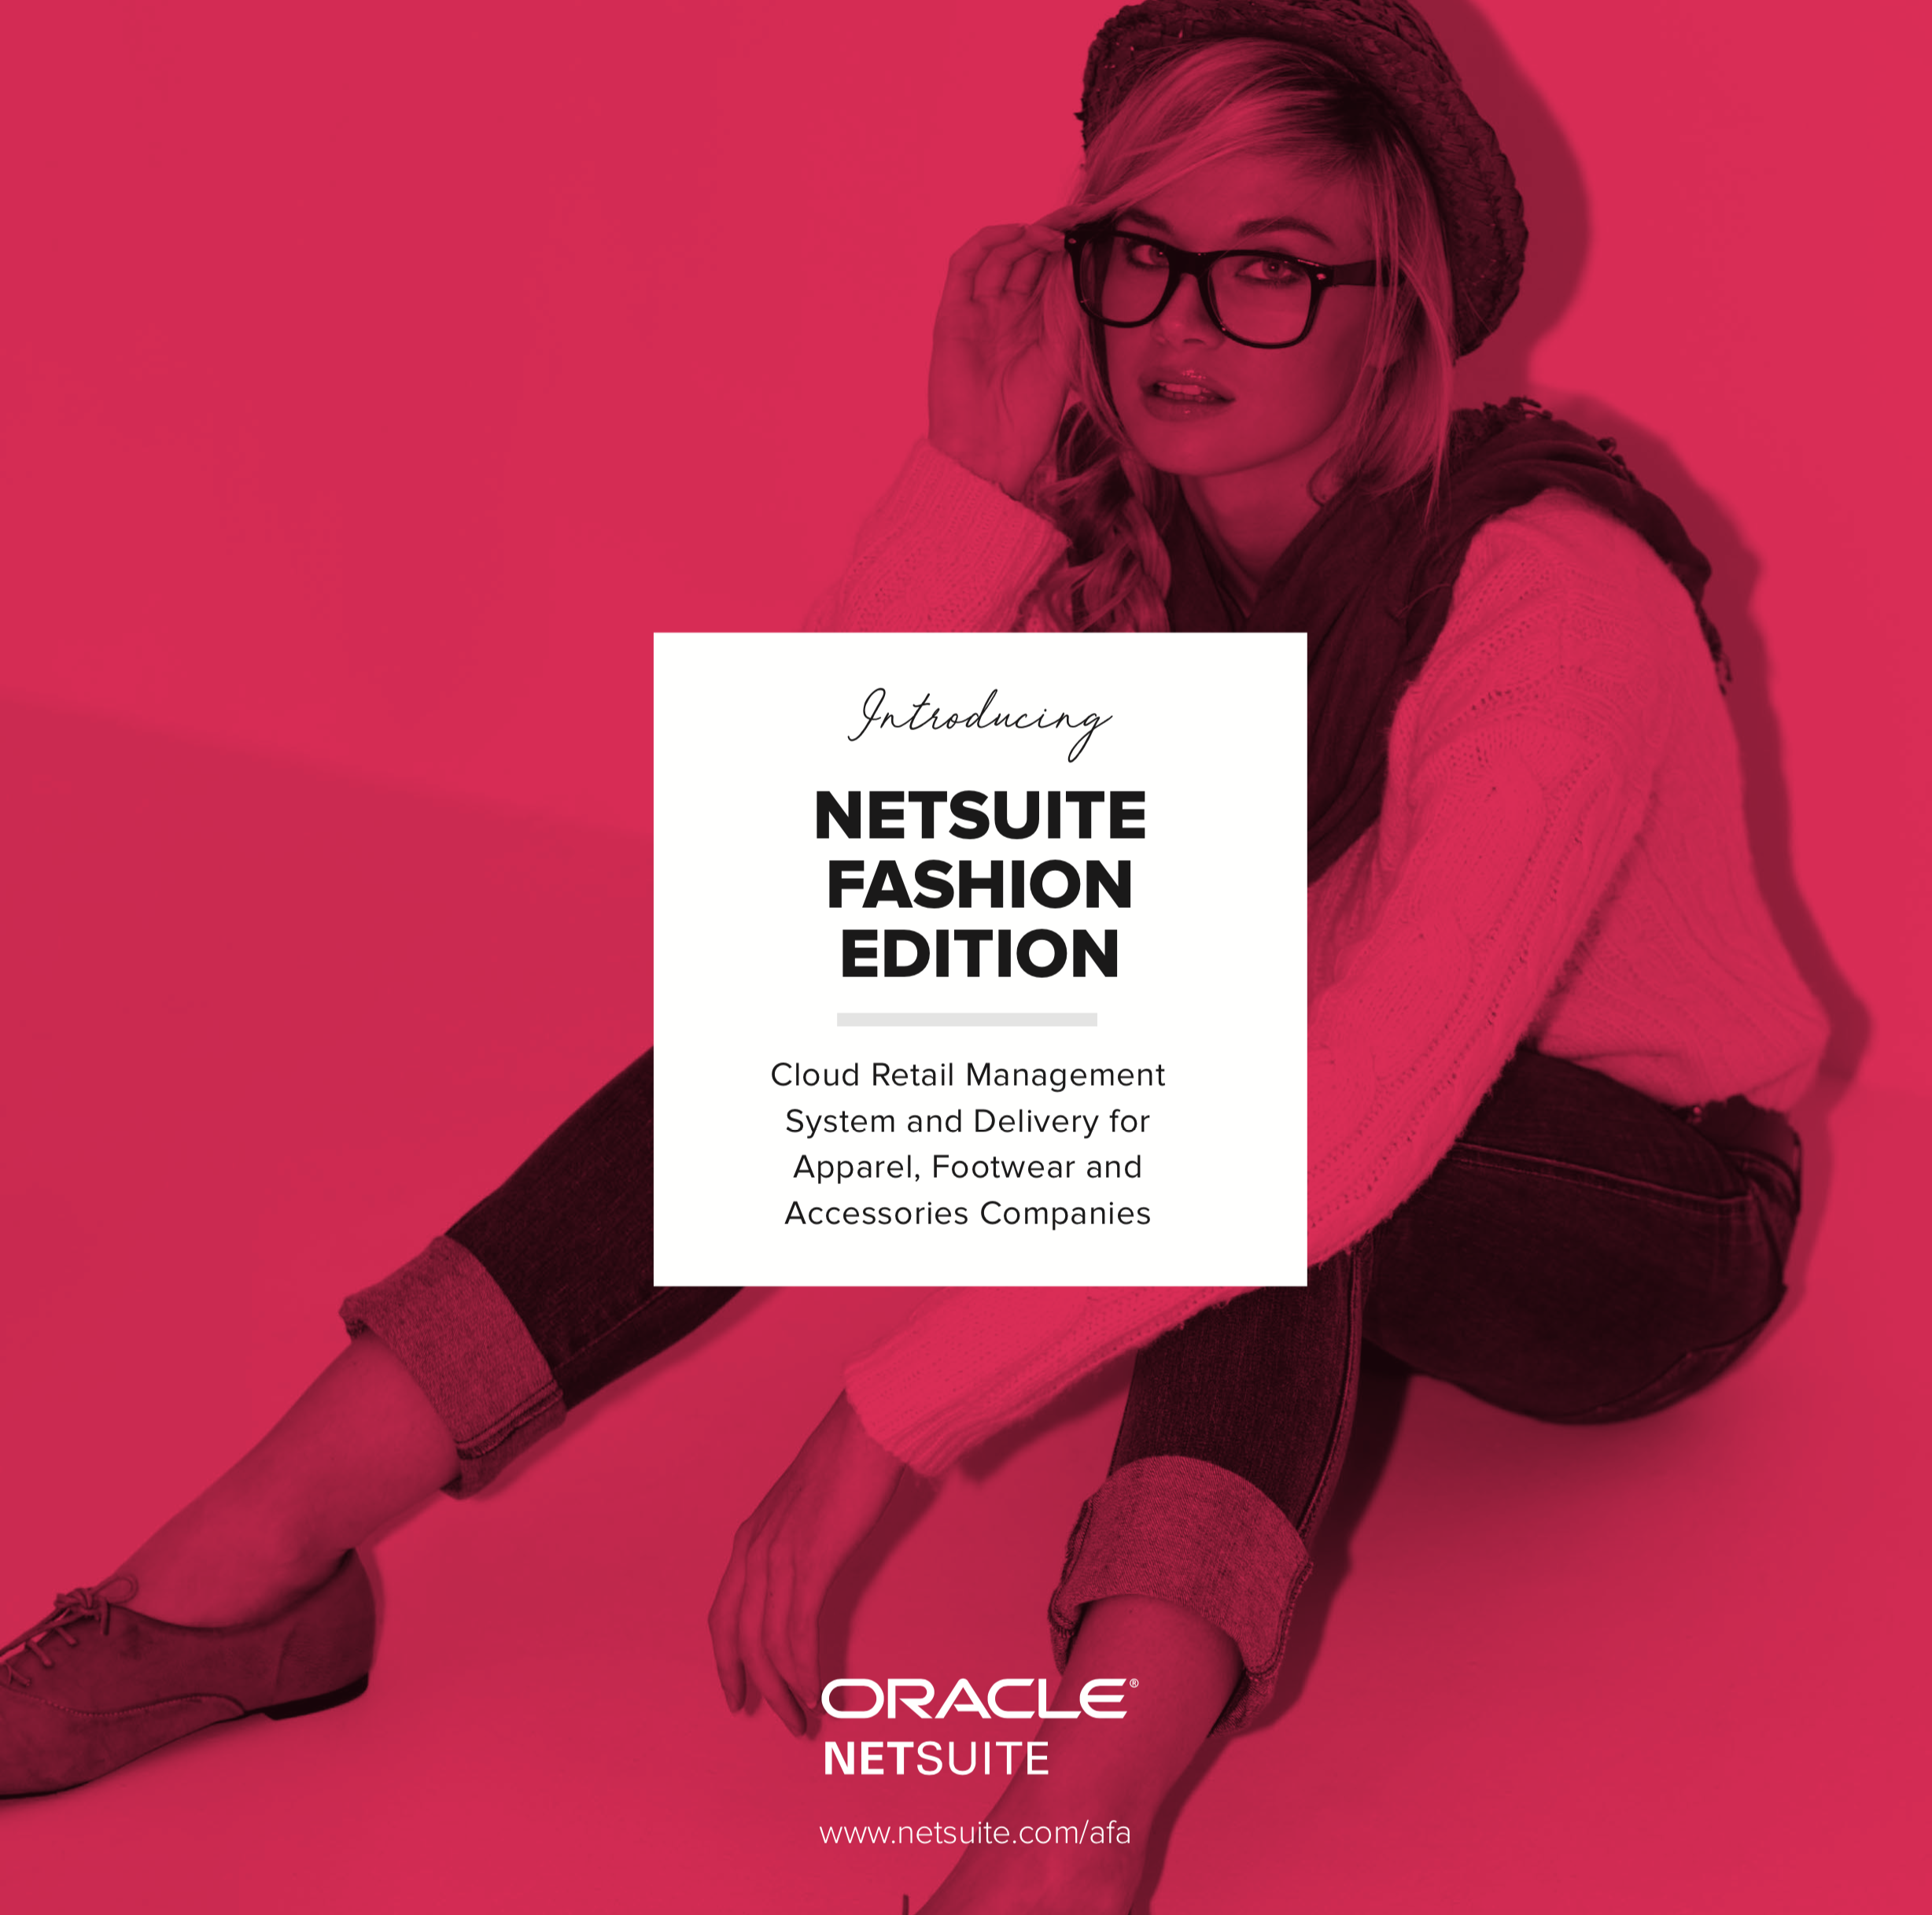 NetSuite - The Fashion Edition